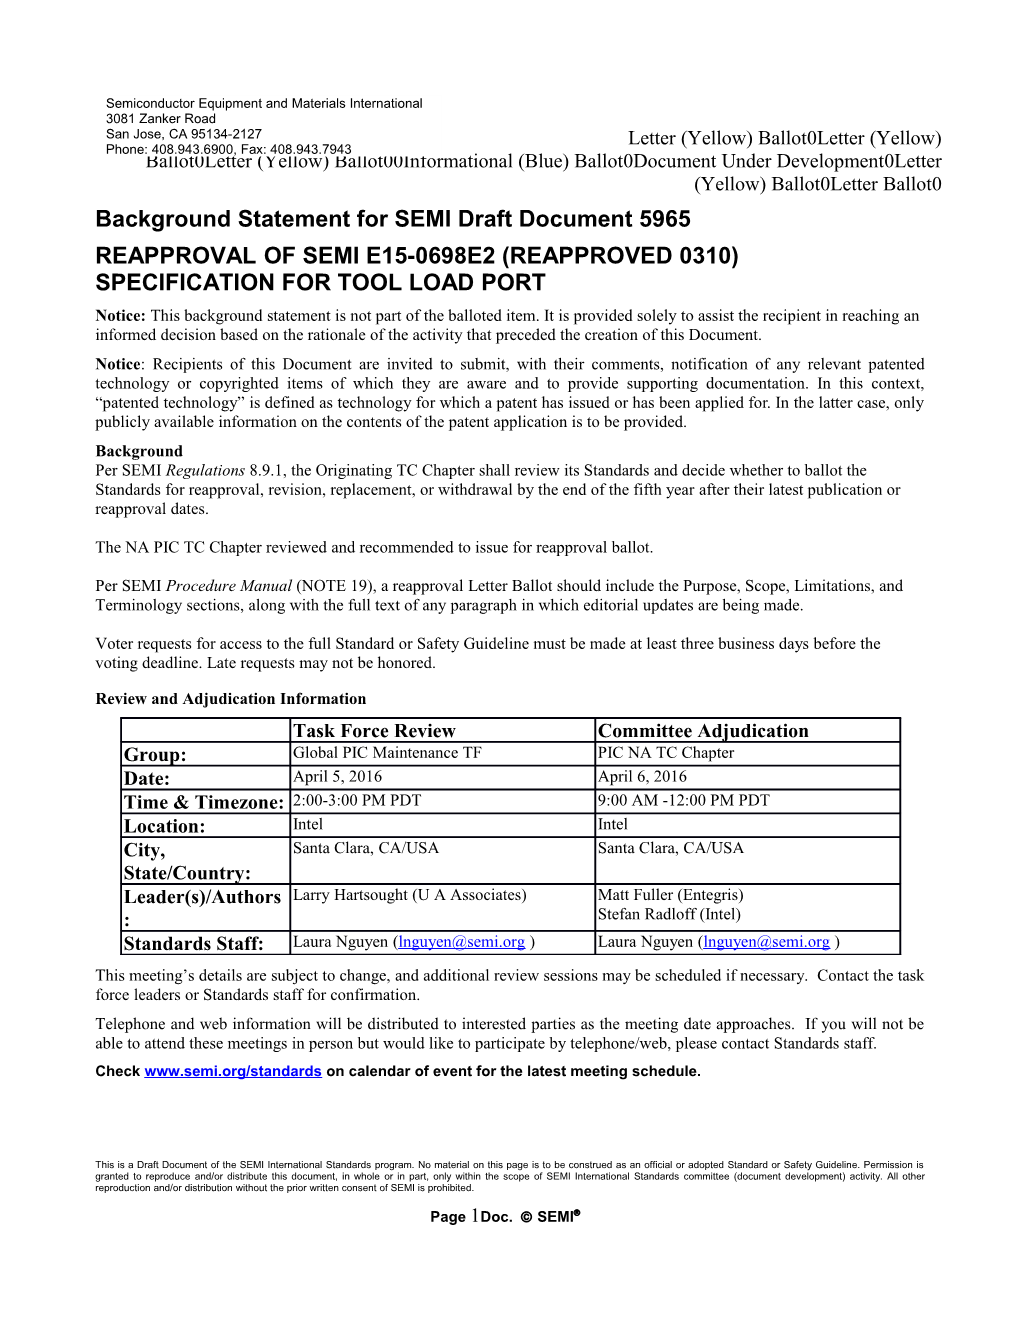 Background Statement for SEMI Draft Document 5965